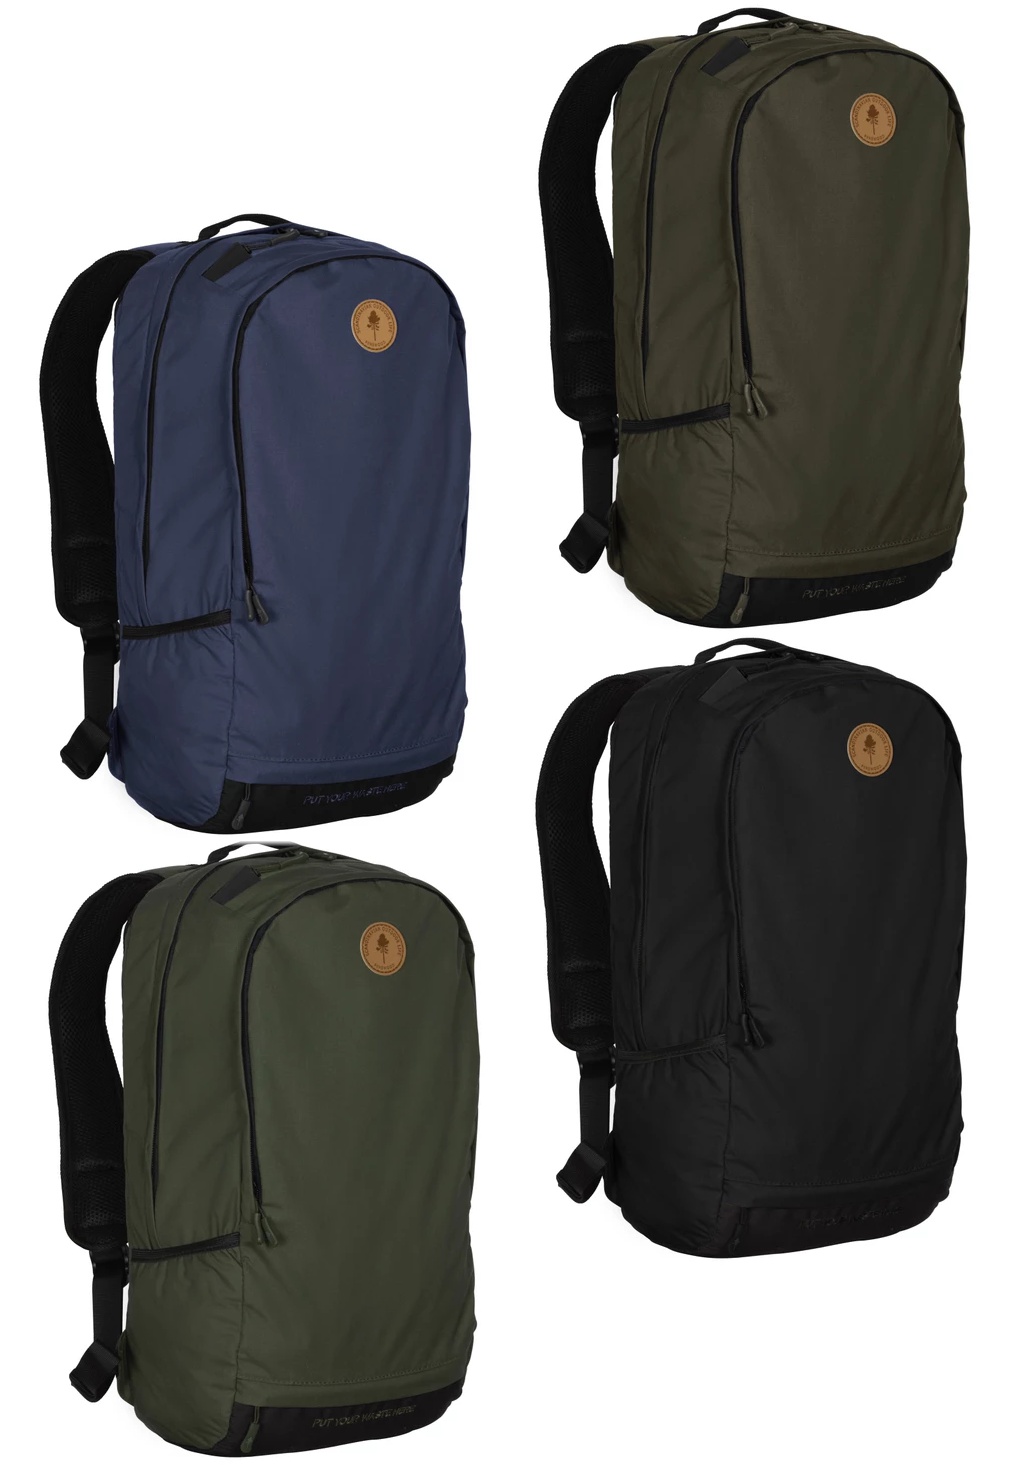 PINEWOOD  DAY PACK 22 l Rucksack Outdoor Urban